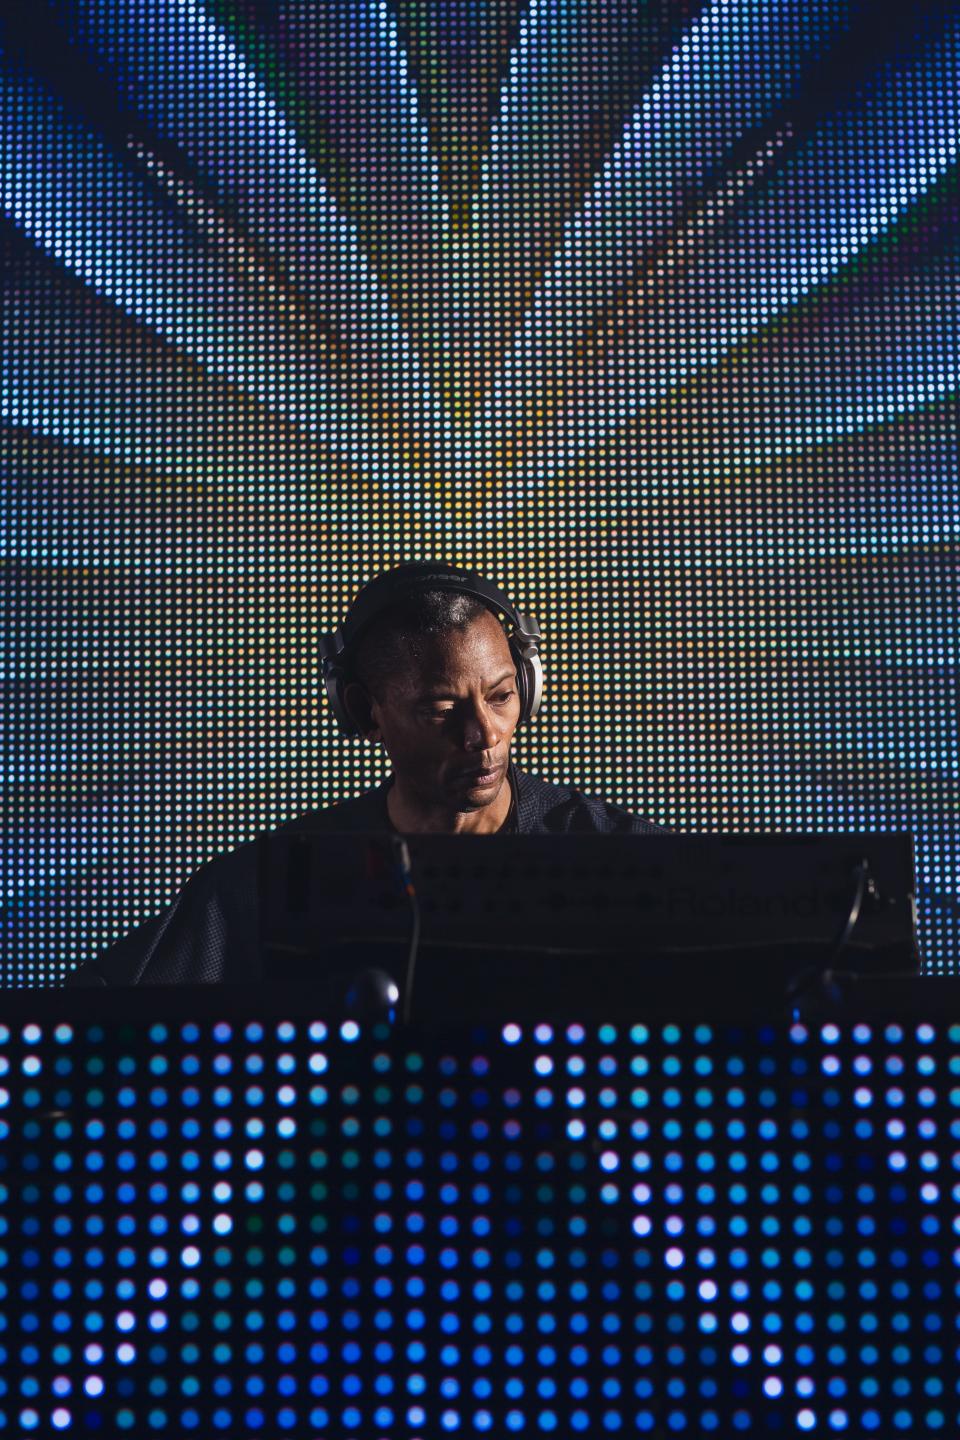 Jeff Mills performs at the Underground Stage during Movement 2014.